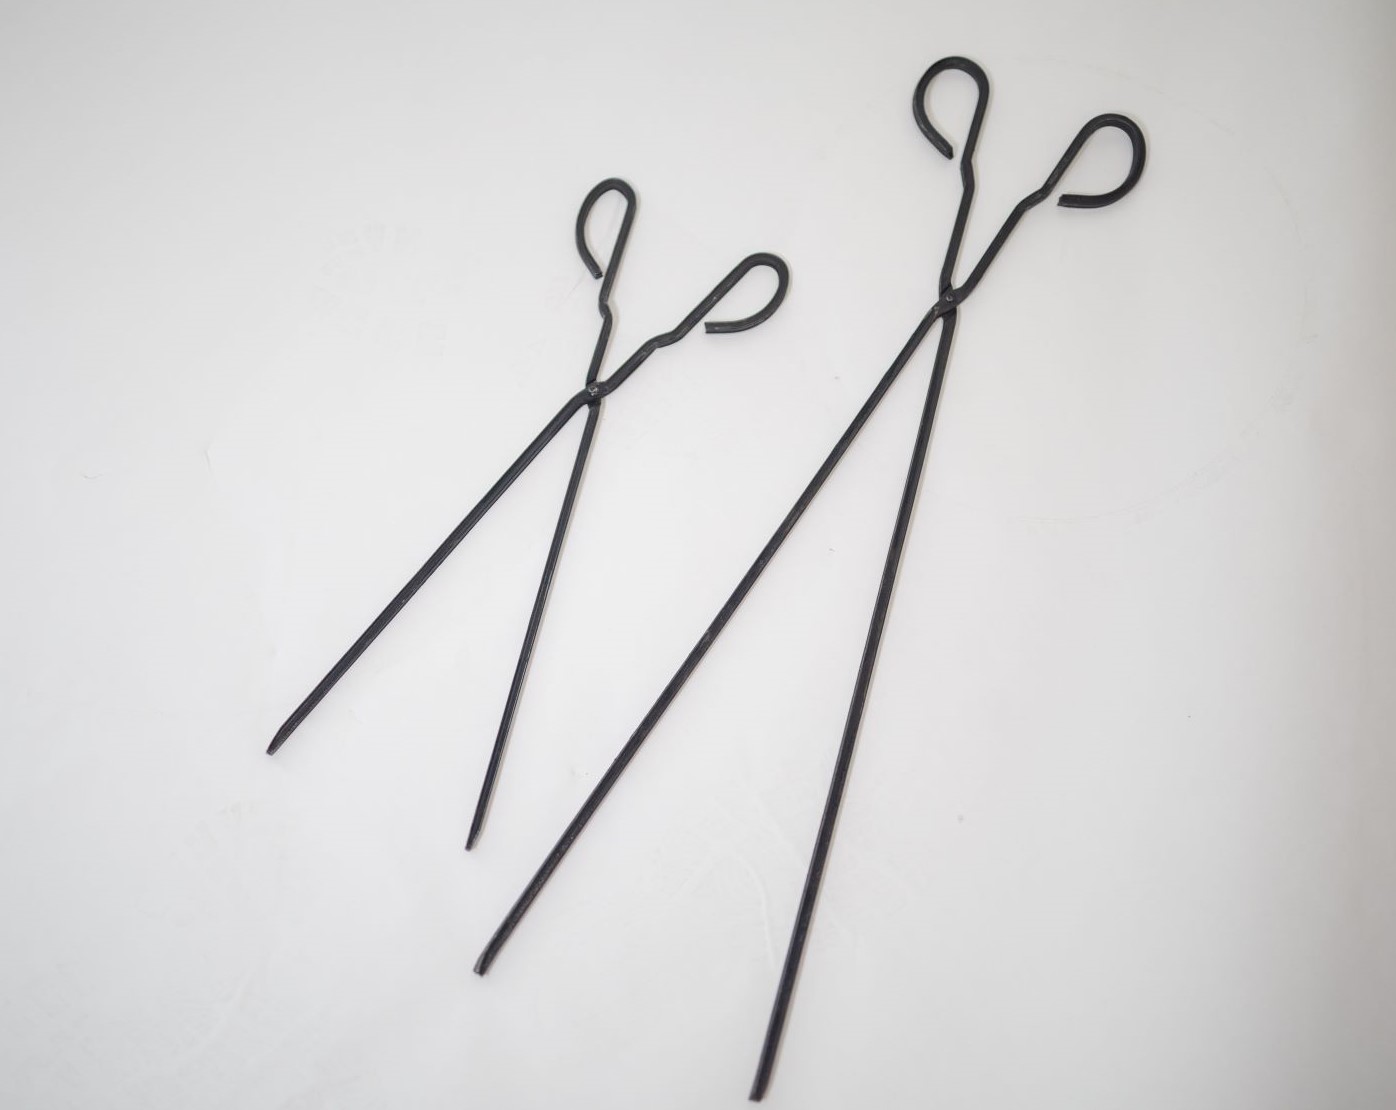 This is an image shows the 2 different length Fireplace tongs available to buy in Australia